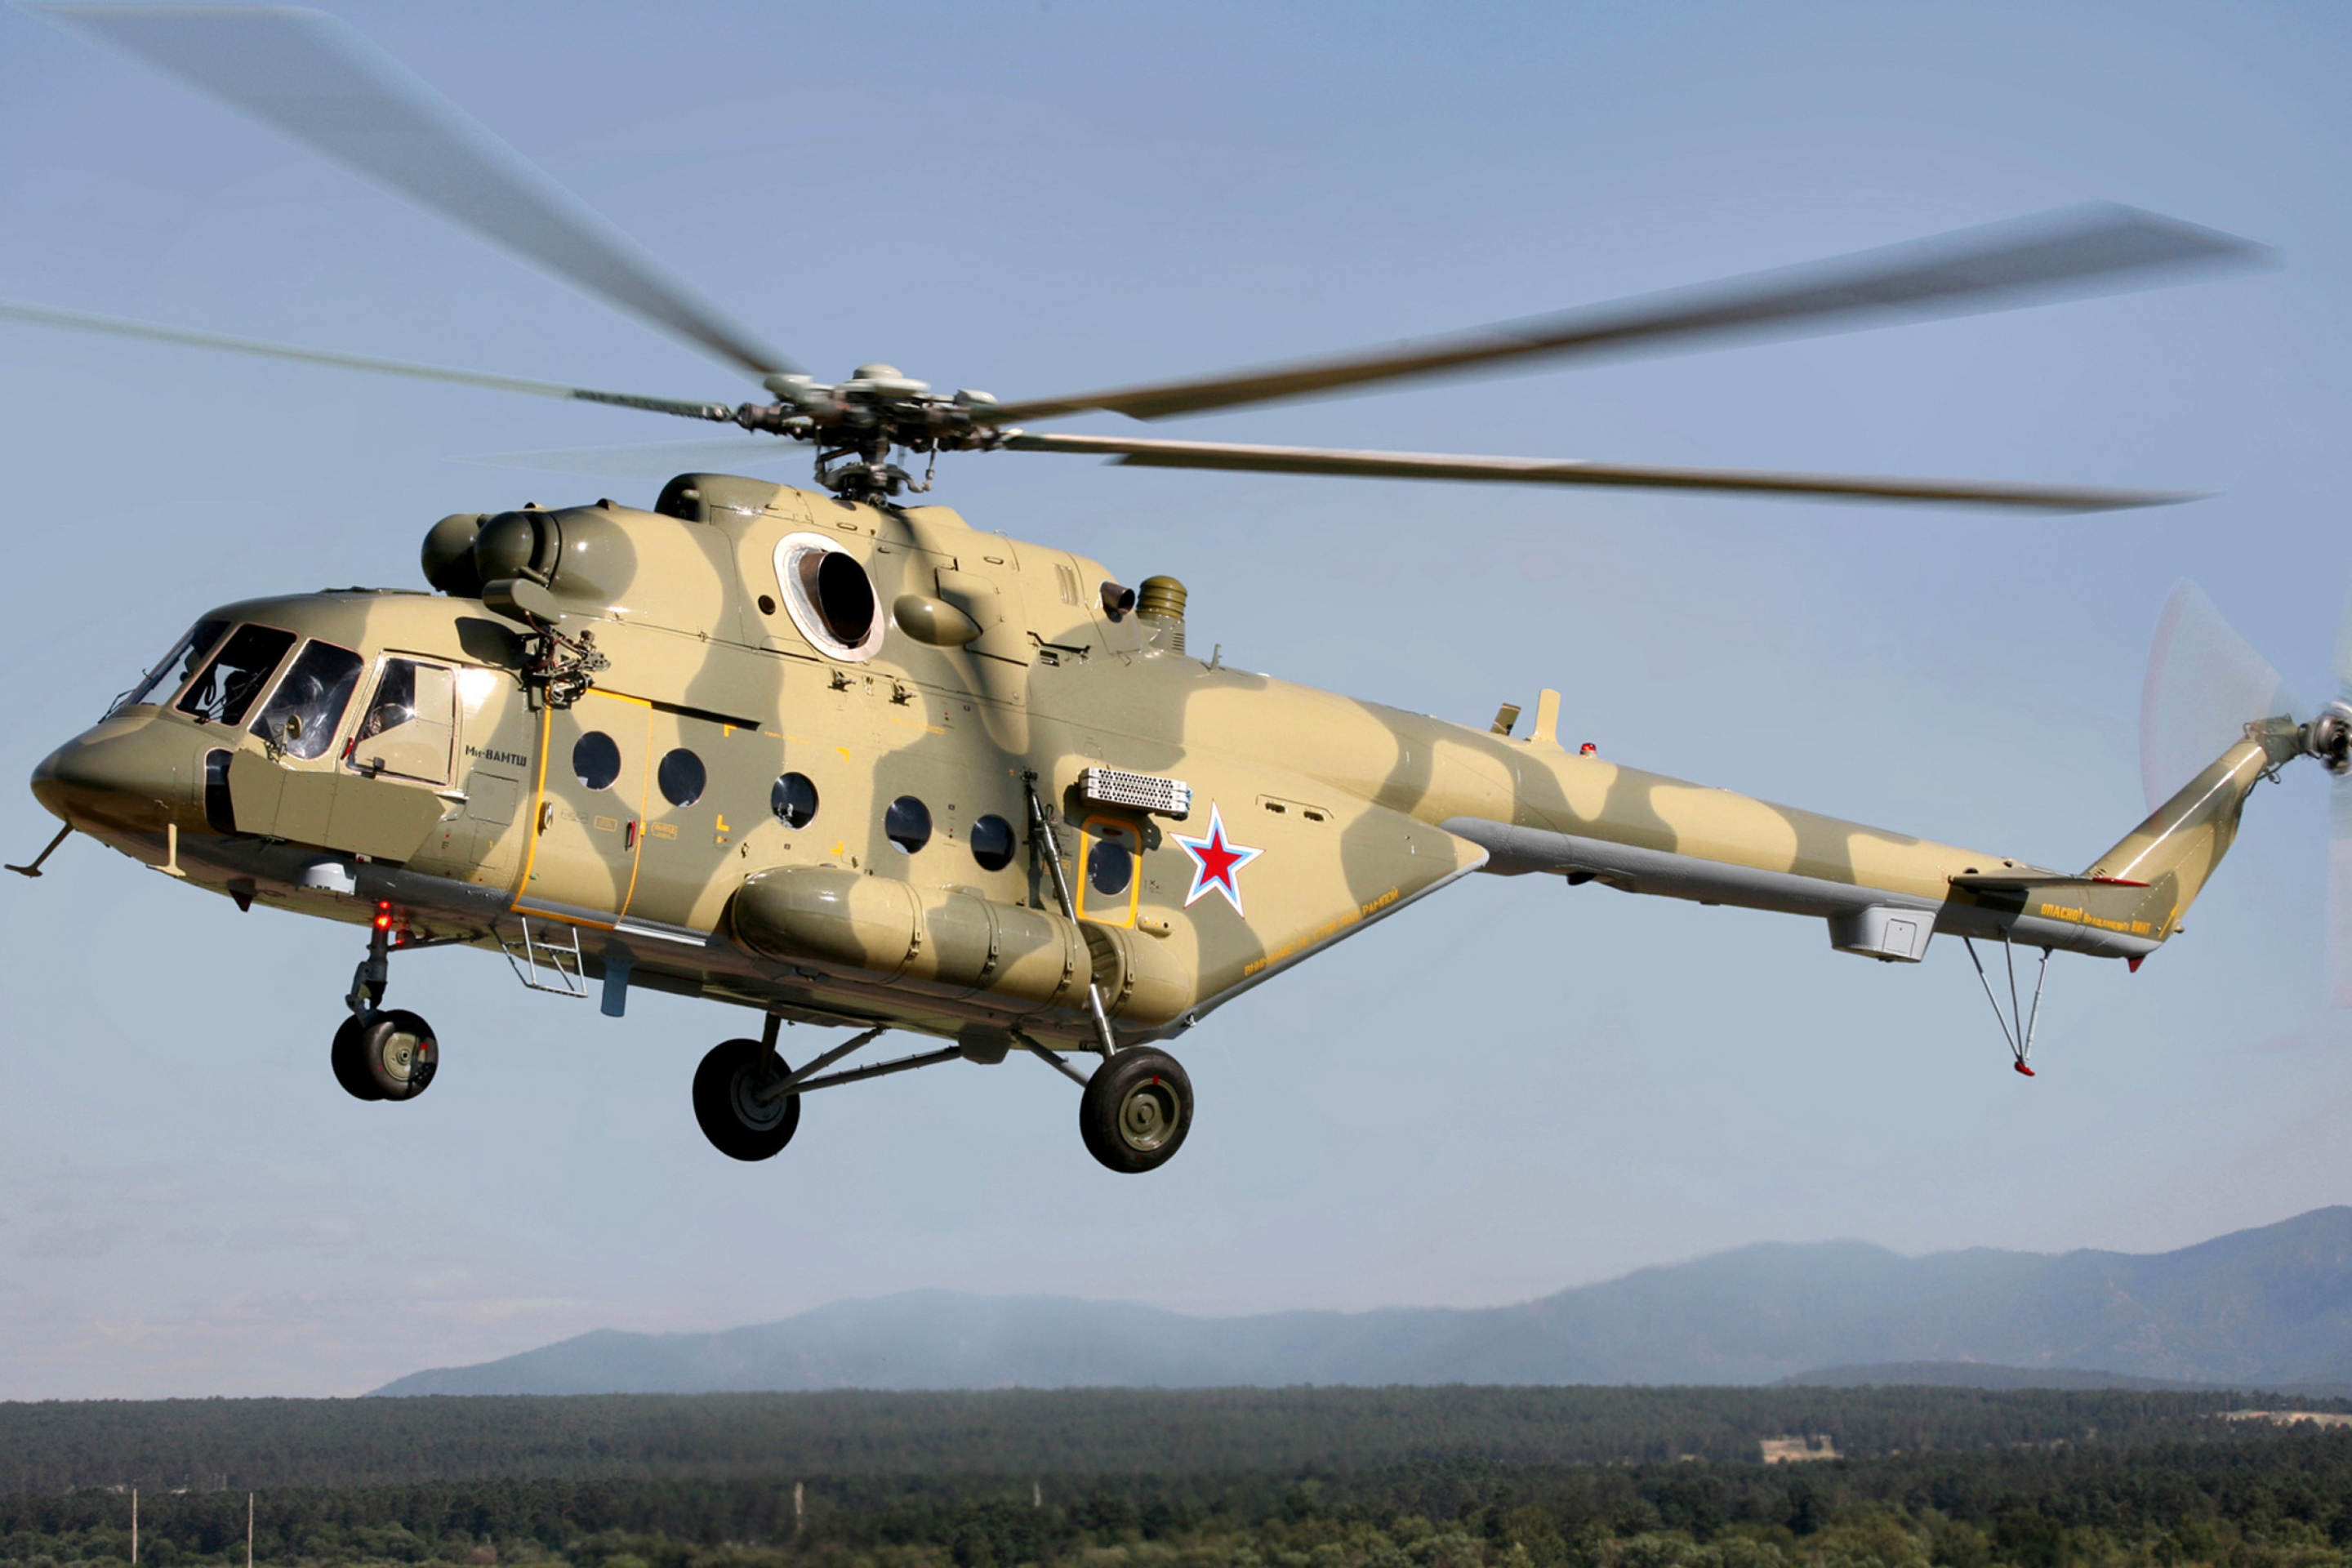 Mil Mi 17 Russian Helicopter wallpaper 2880x1920